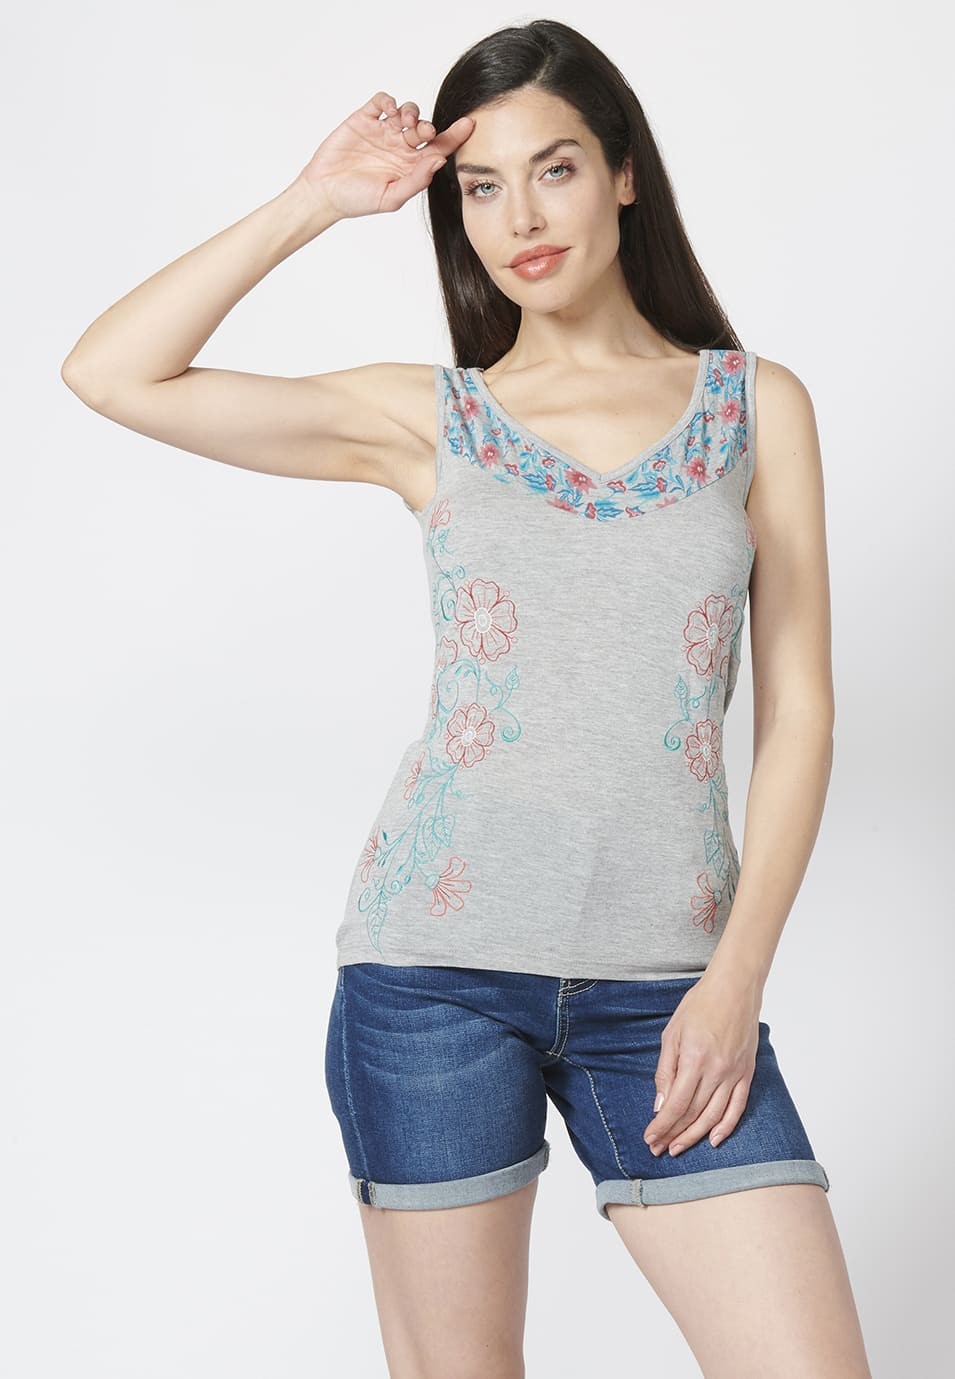 Tank Top with V-neckline and Floral Print and Embroidery for Woman in Gray color